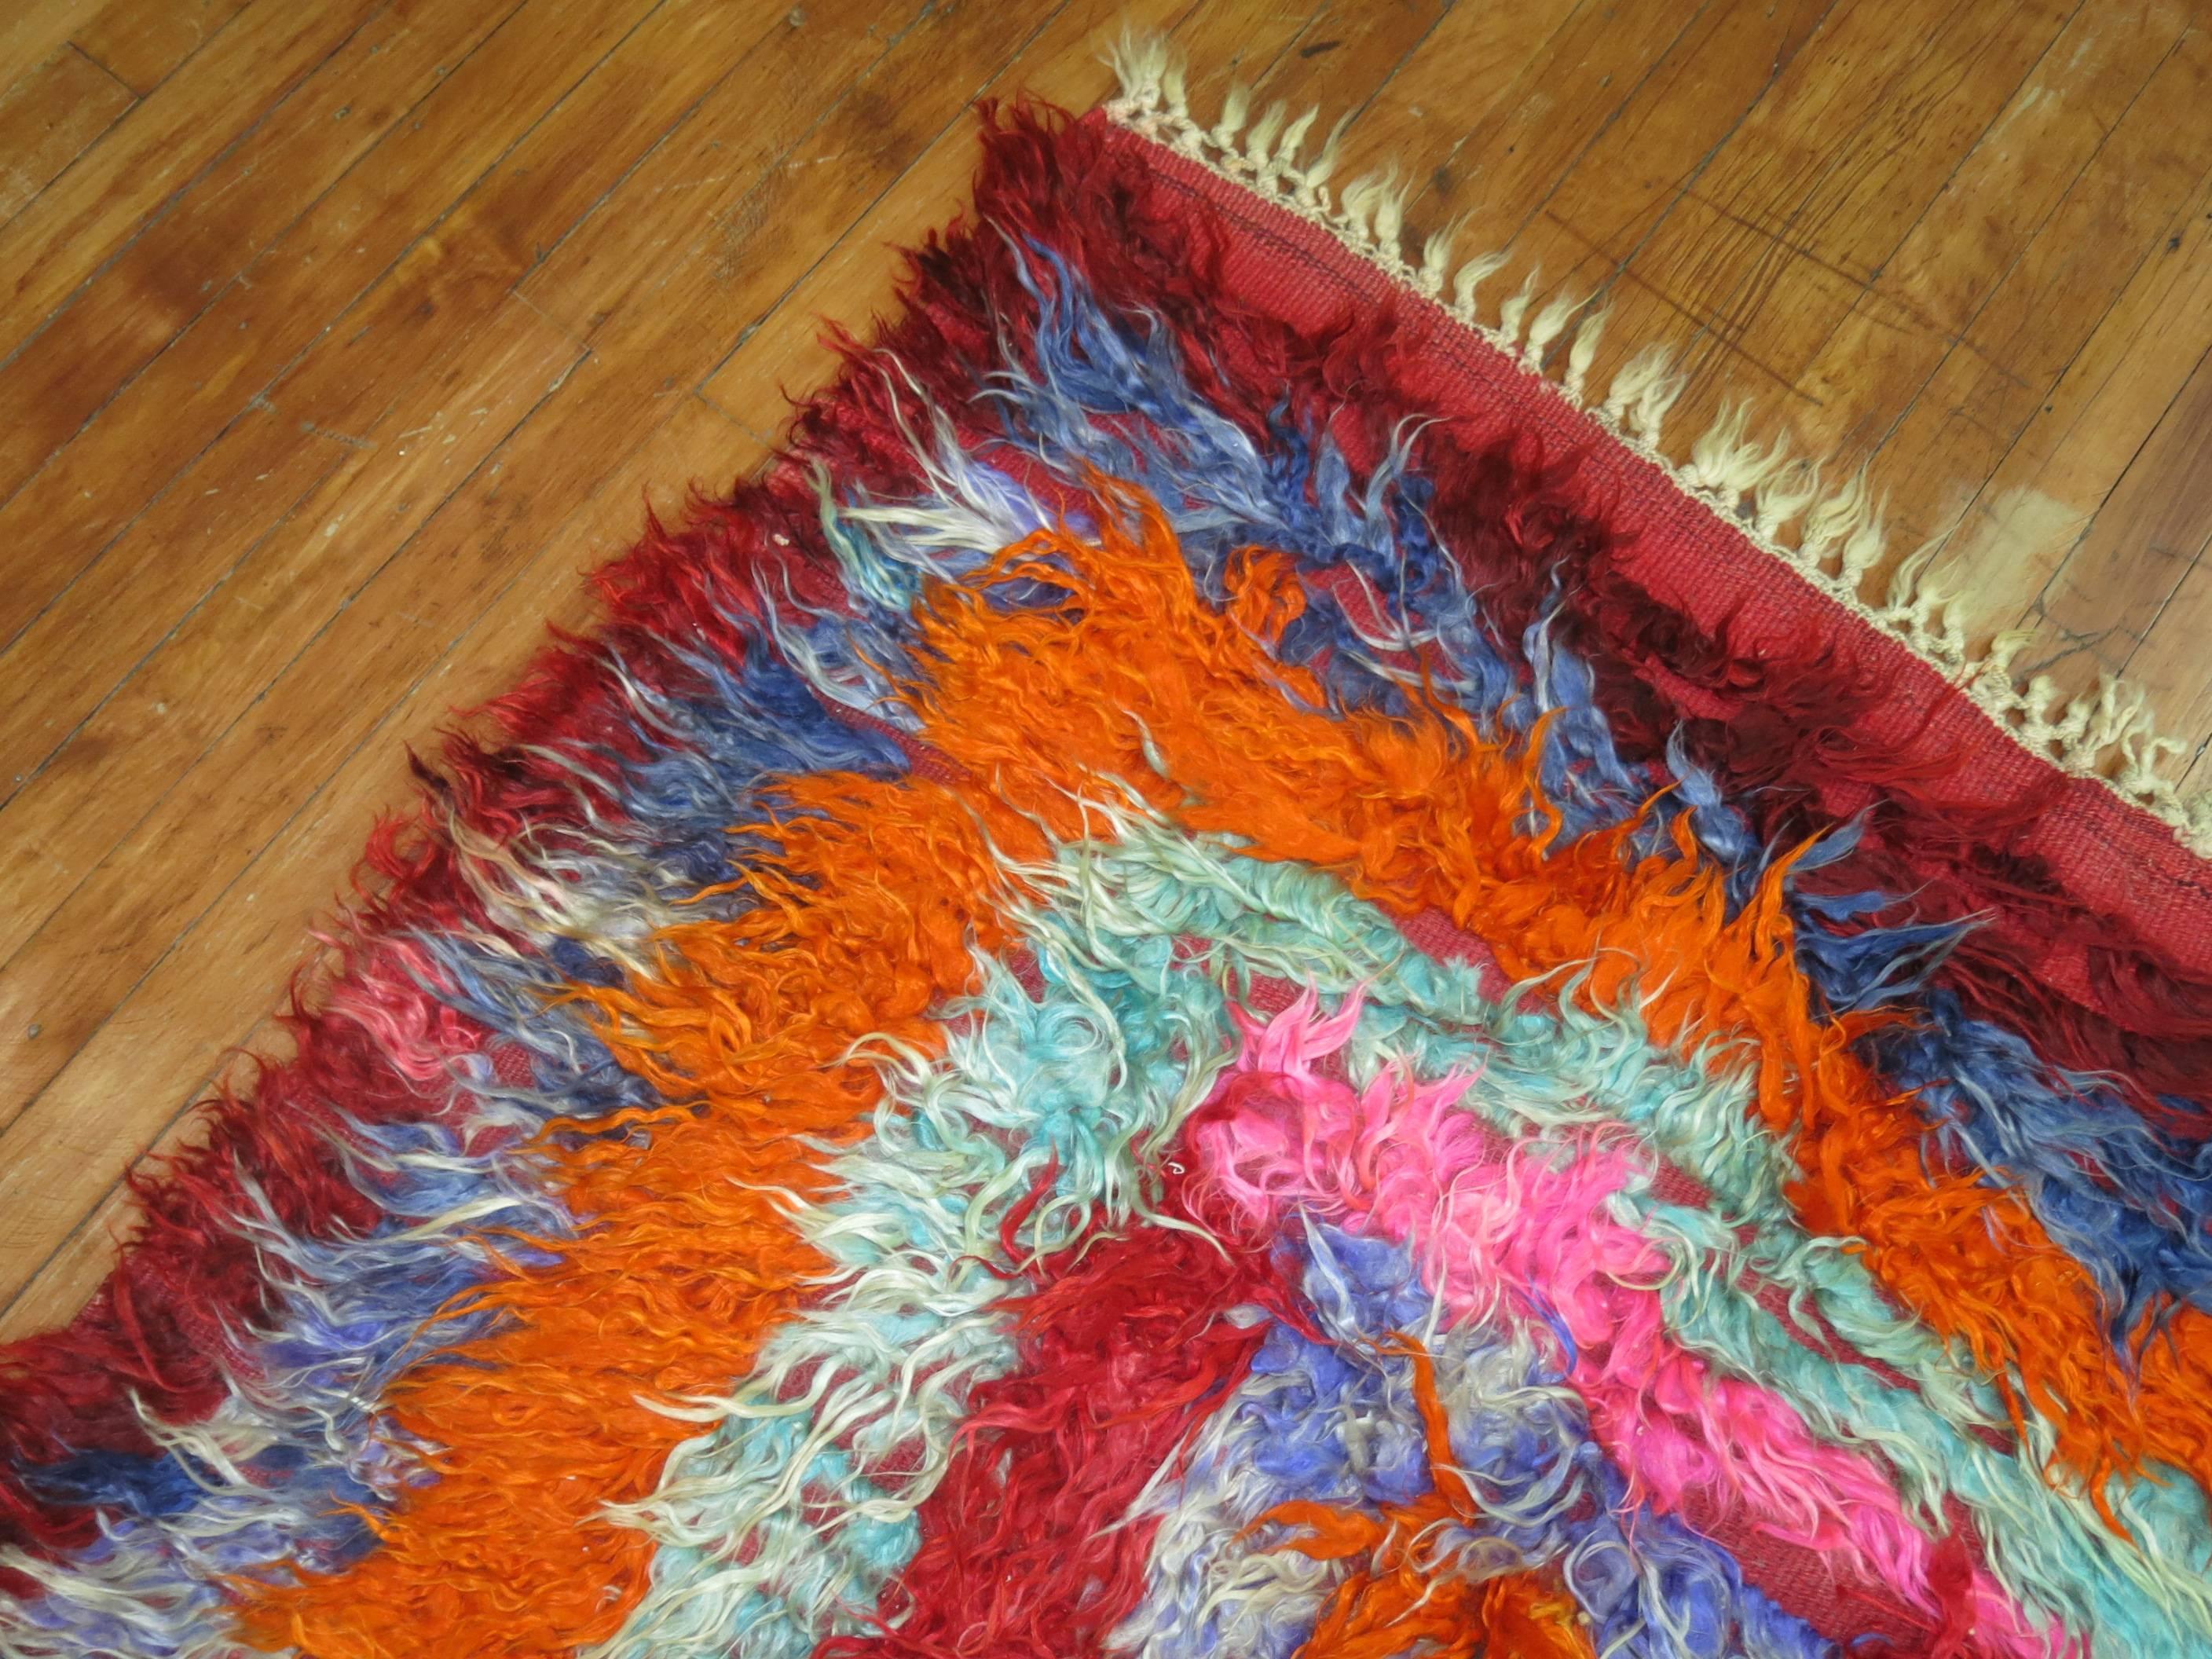 An electrical colored mid-20th century Turkish Tulu Shag Yatak rug. These type of rugs were originally woven to be used as beds. Nowadays these are used as floor coverings, primary for apartment lofts. Very cozy and definitely has a boho